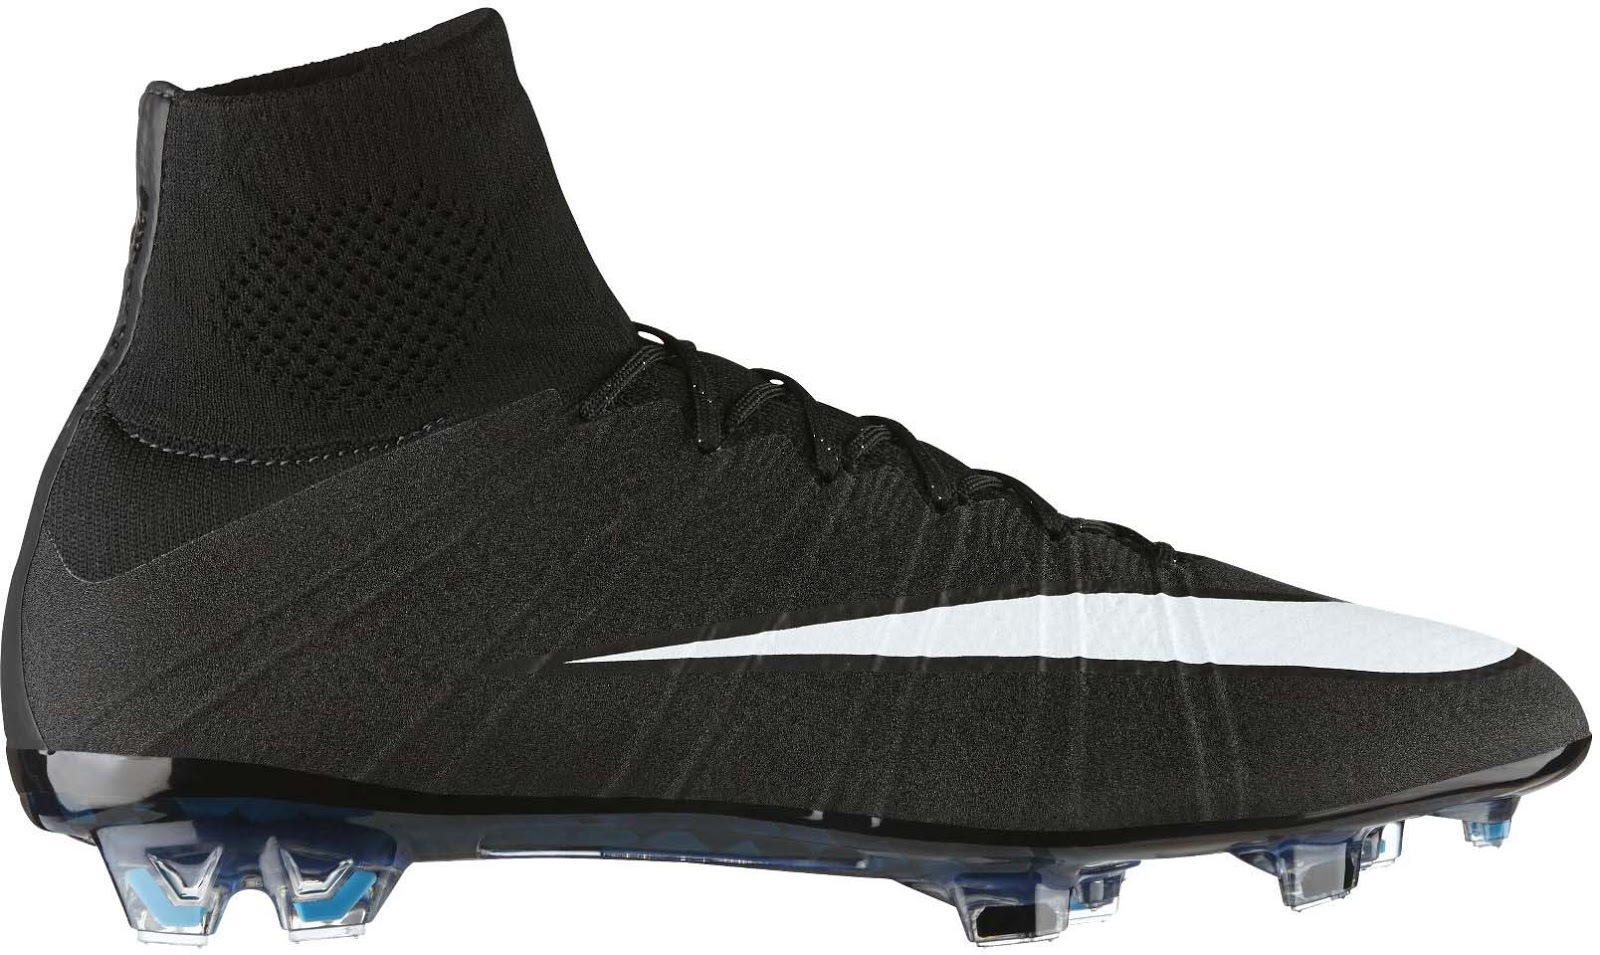 Nike Mercurial Superfly Cristiano Ronaldo Boot Released Footy